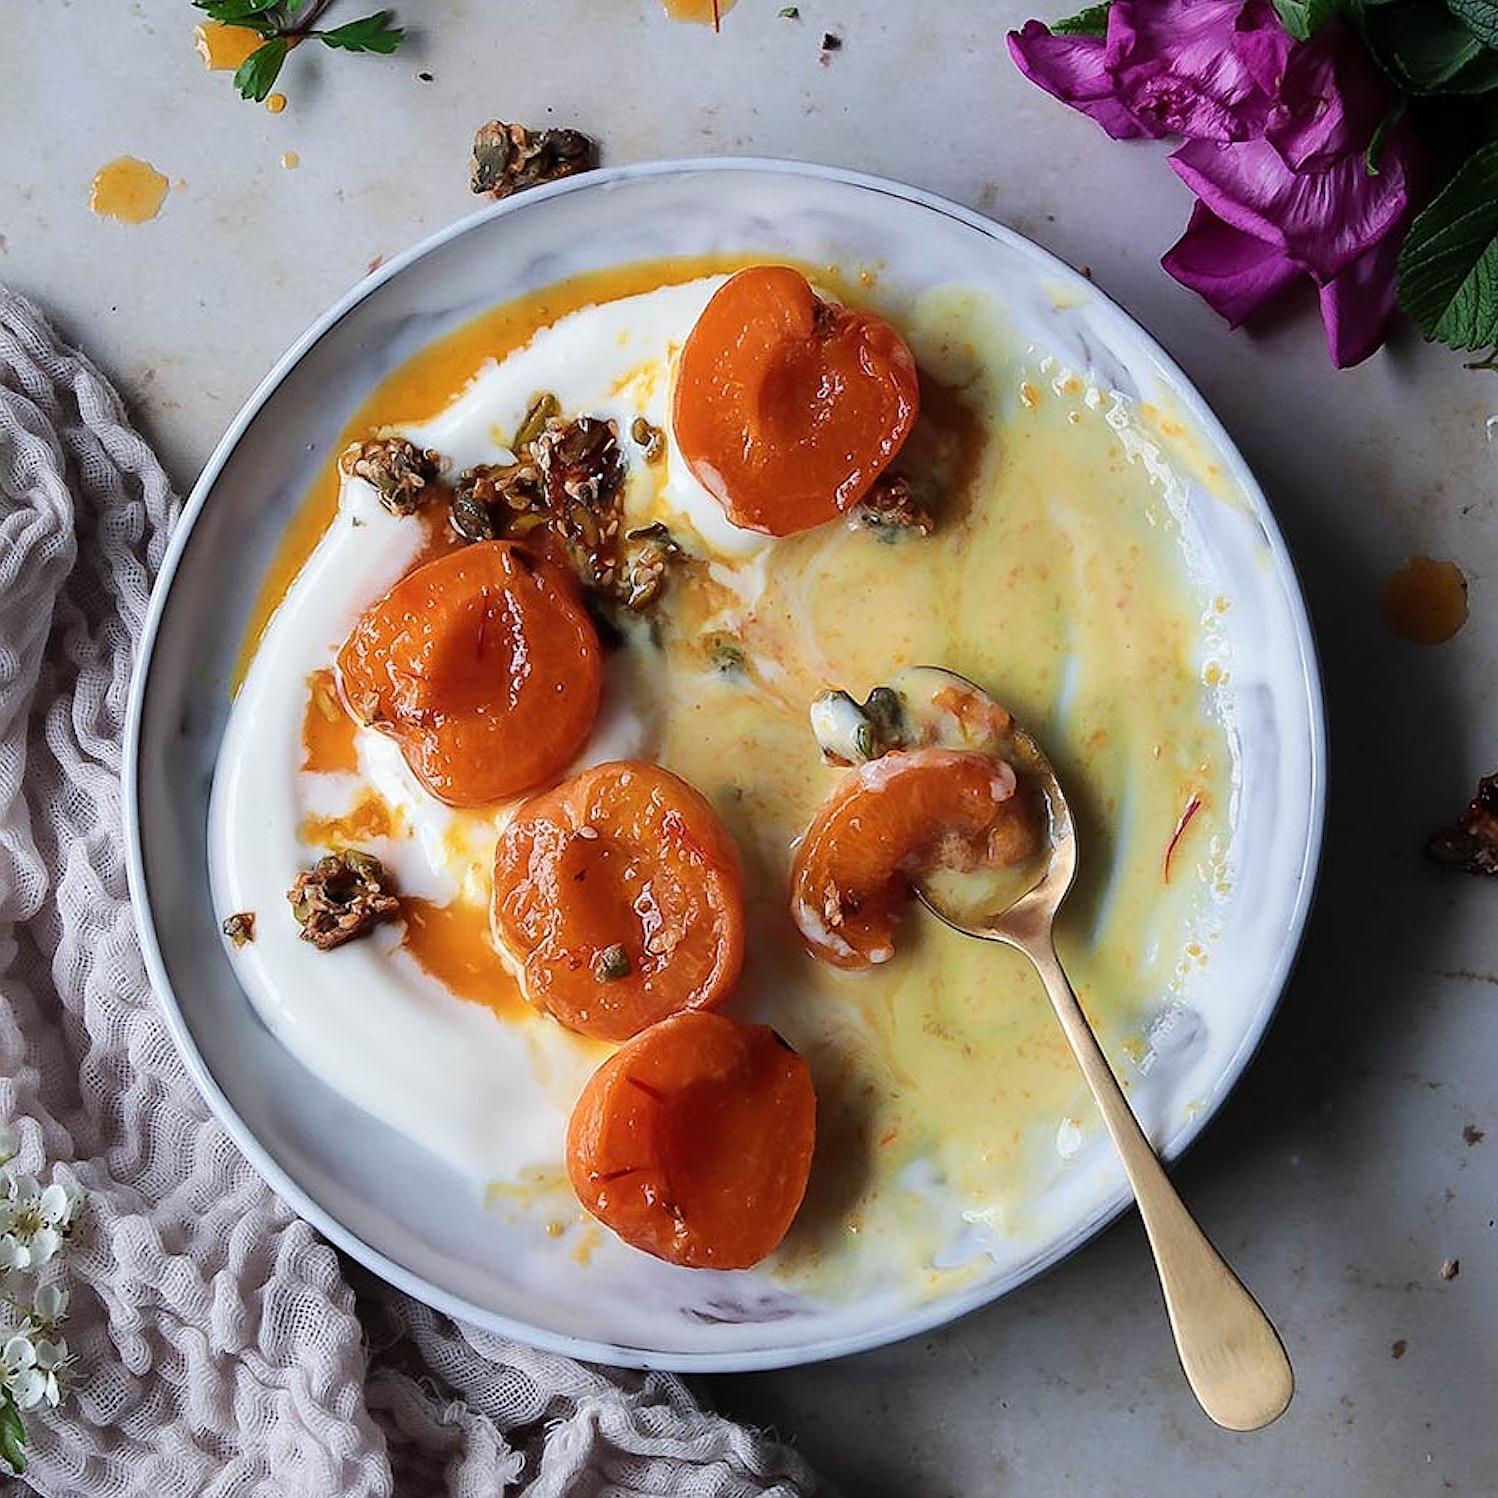  Vibrant apricots, ready to be paired with pistachios